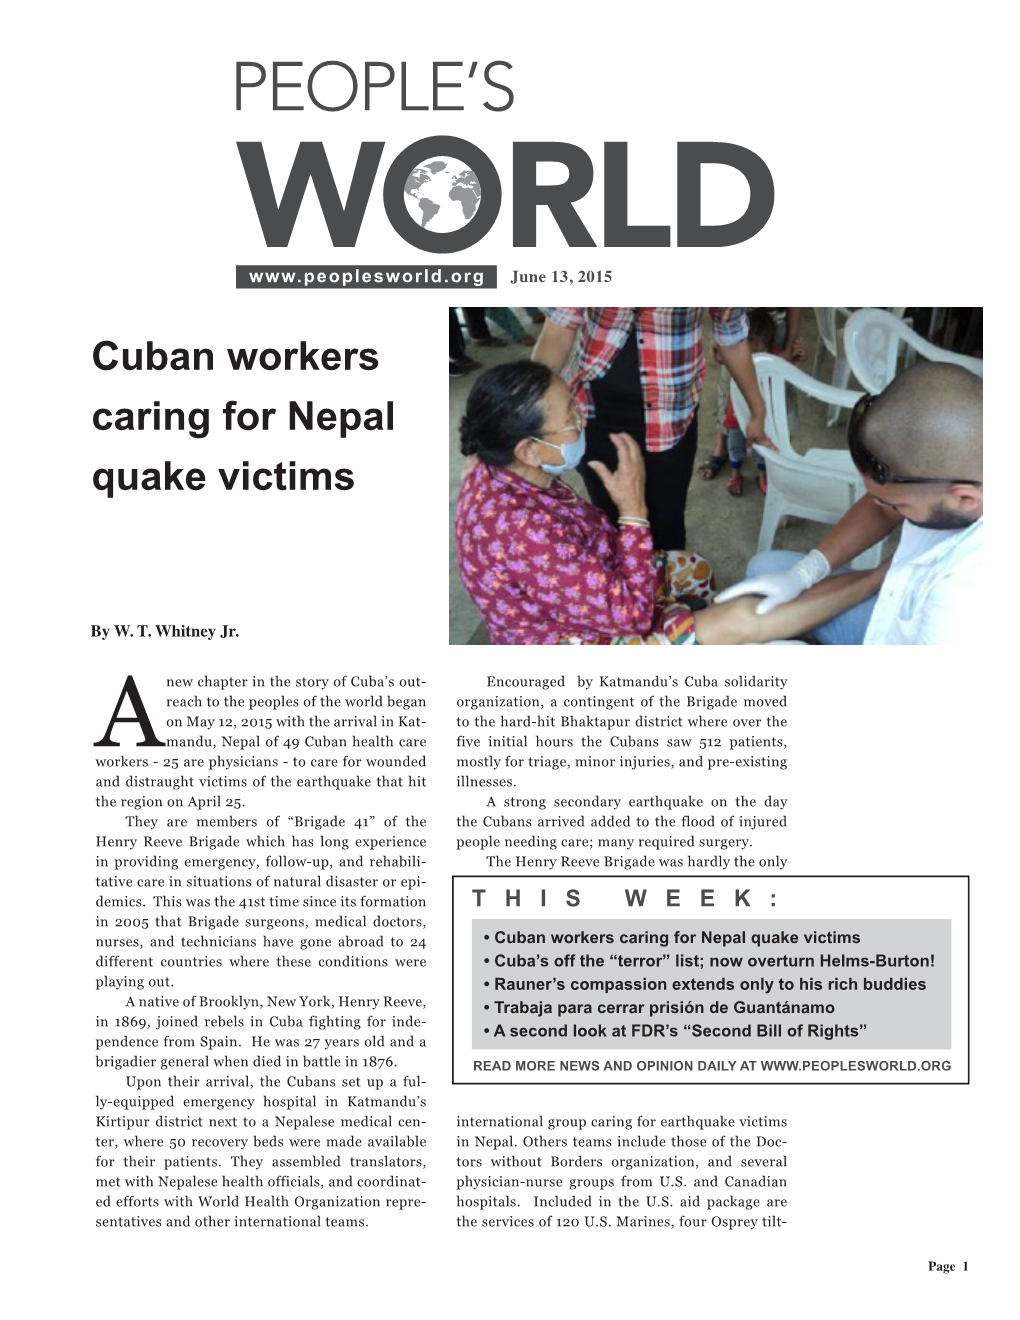 Cuban Workers Caring for Nepal Quake Victims